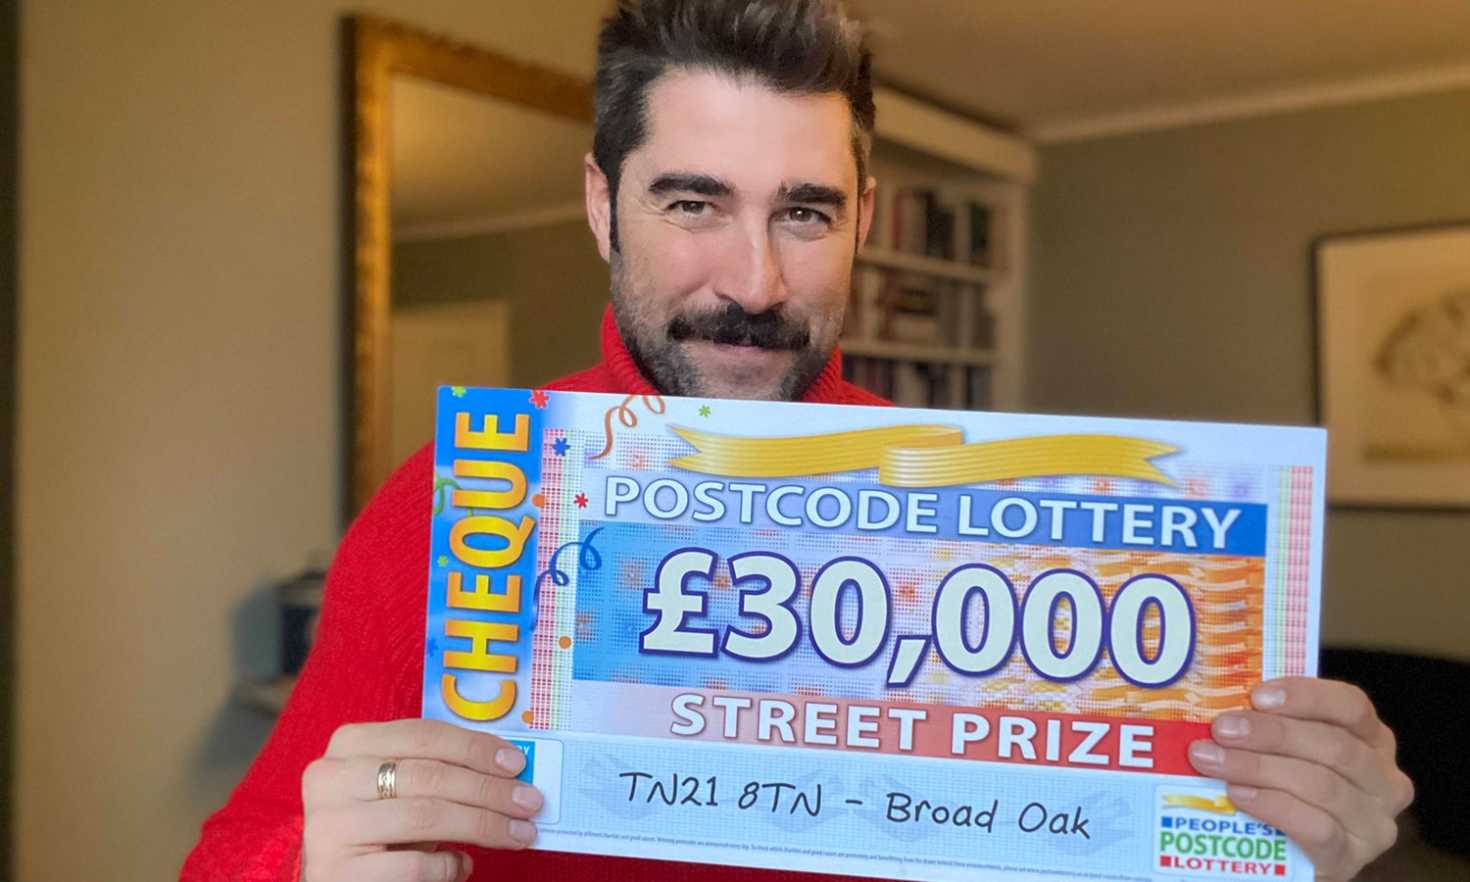 Matt reveals a fantastic £30,000 cheque for today's only Street Prize winner in Broad Oak